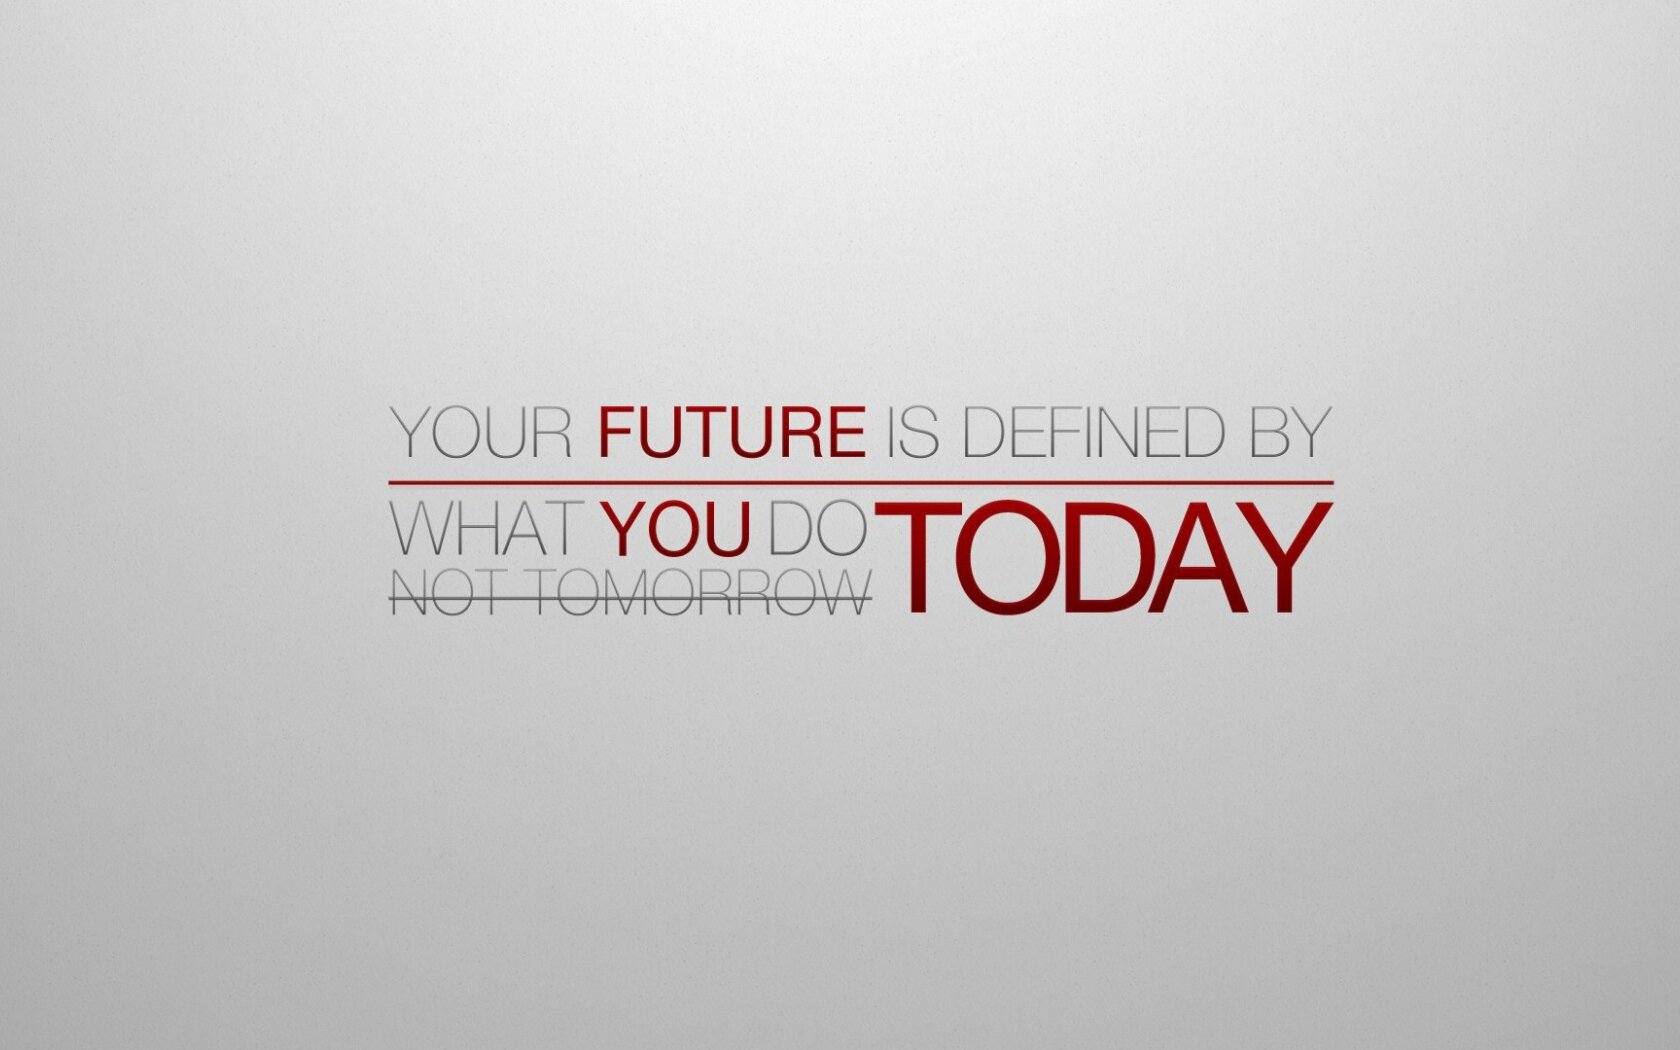 Your future is created today Wallpaper photo